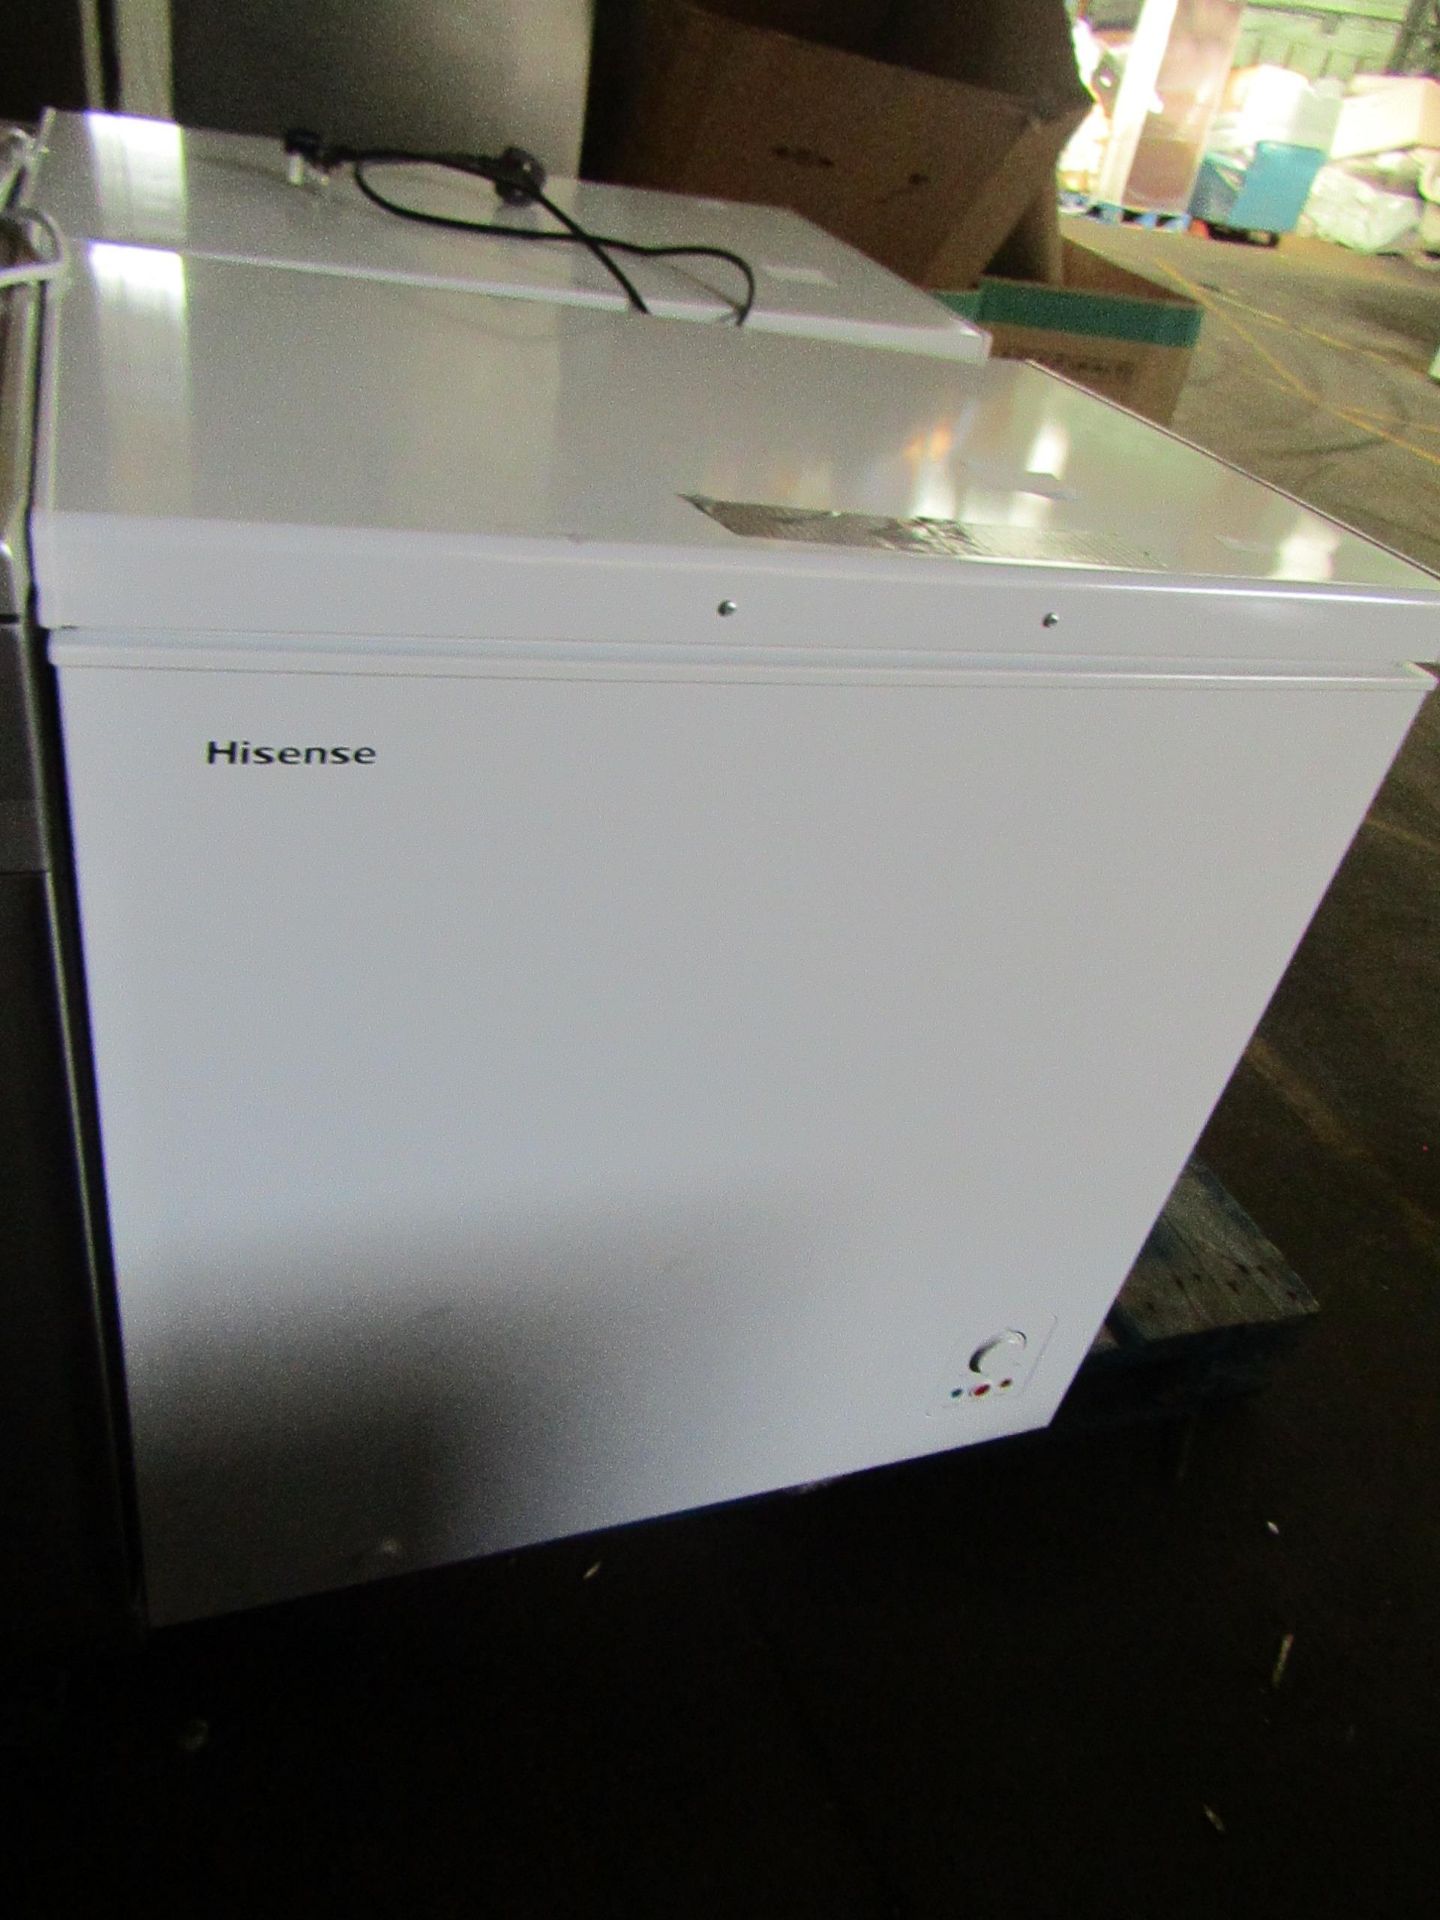 Hisense Chest Freezer, Powers om, Has  few marks/dents on the top lid but very clean inside tested